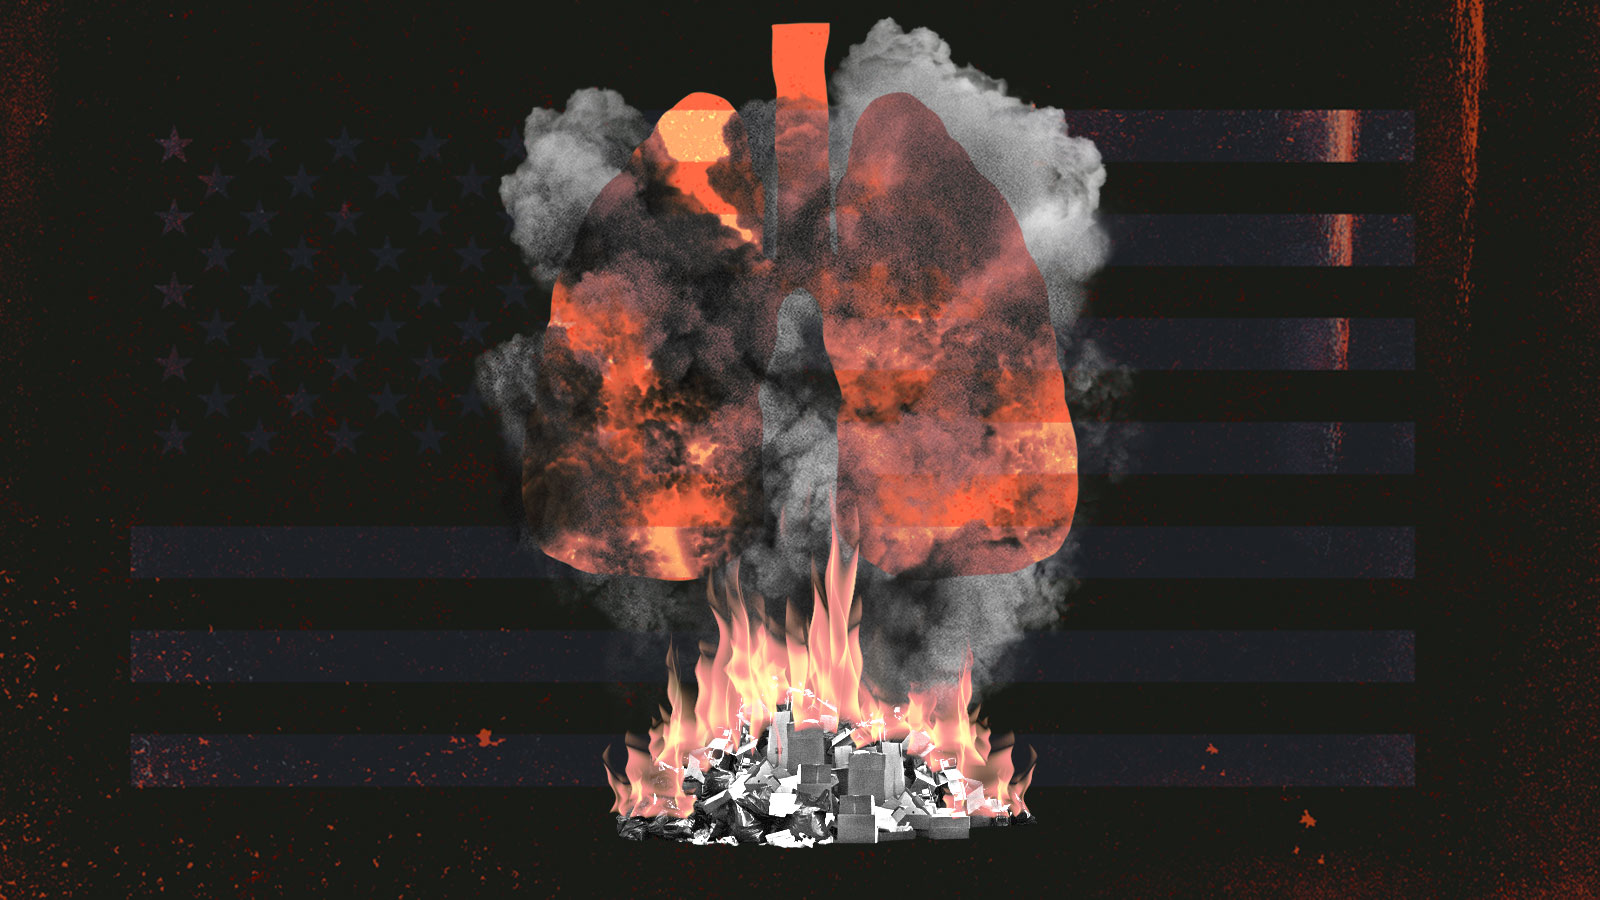 Collage: dark background with barely visible American flag and a pile of burning trash with smoke rising up and partially obscuring a silhouette of lungs